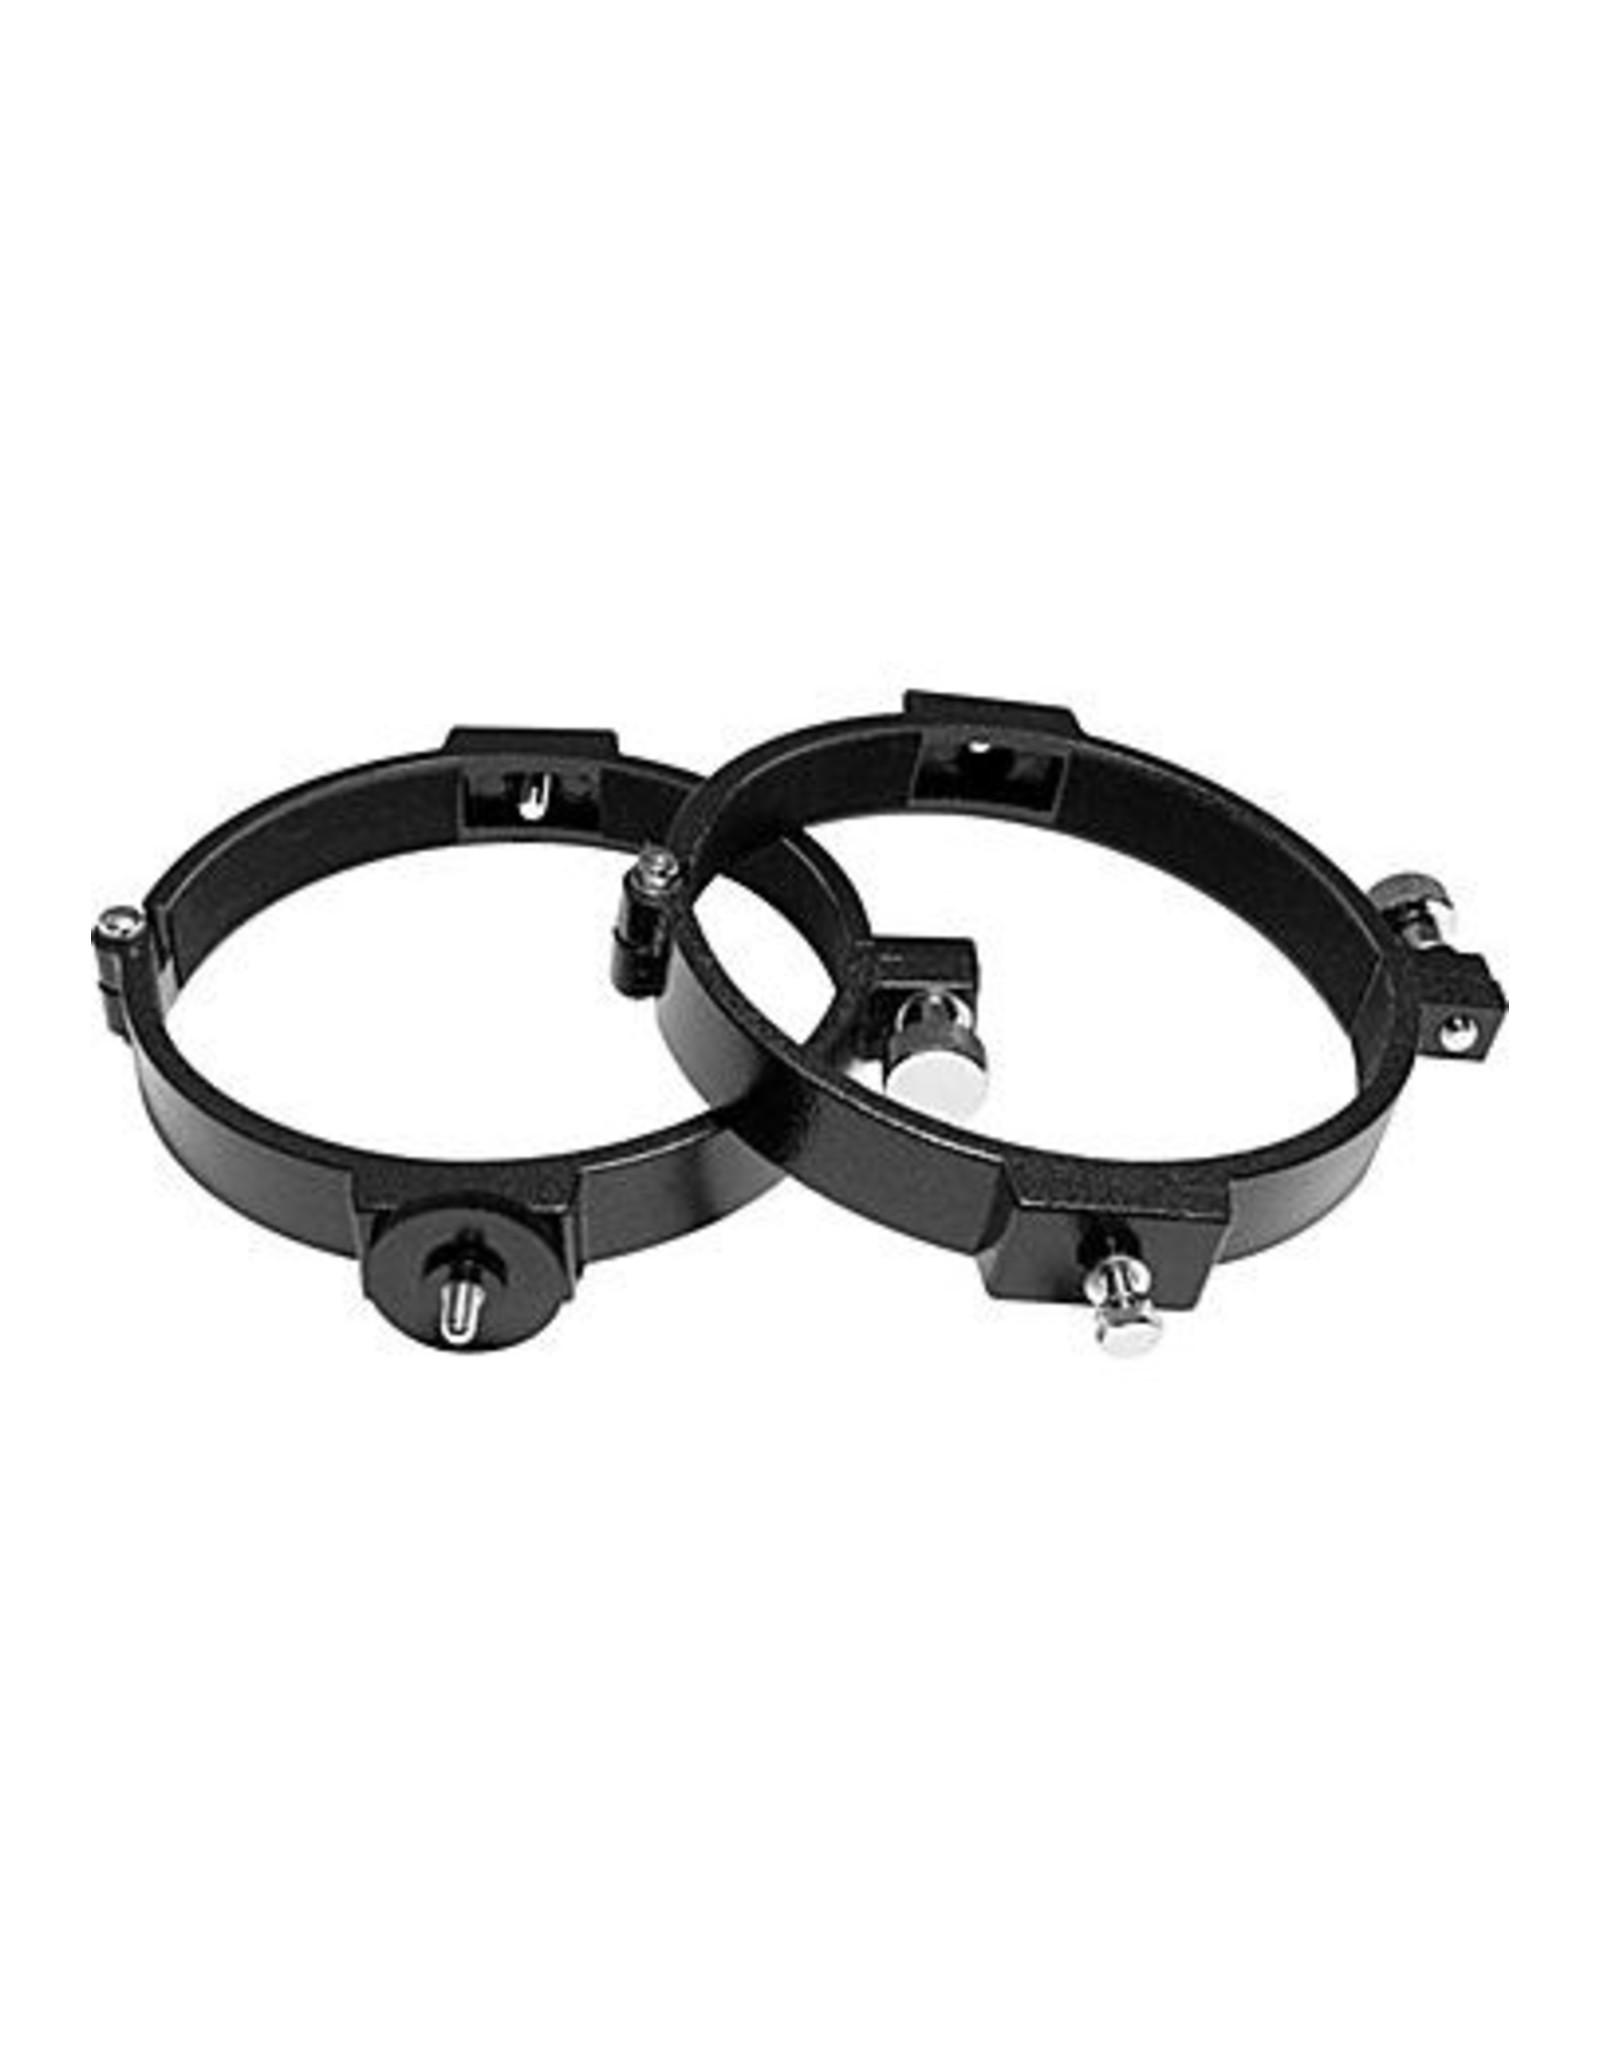 Orion Orion 144mm ID Telescope Tube Mounting Rings - Camera Concepts Quality Telescope Tube Mounting Rings